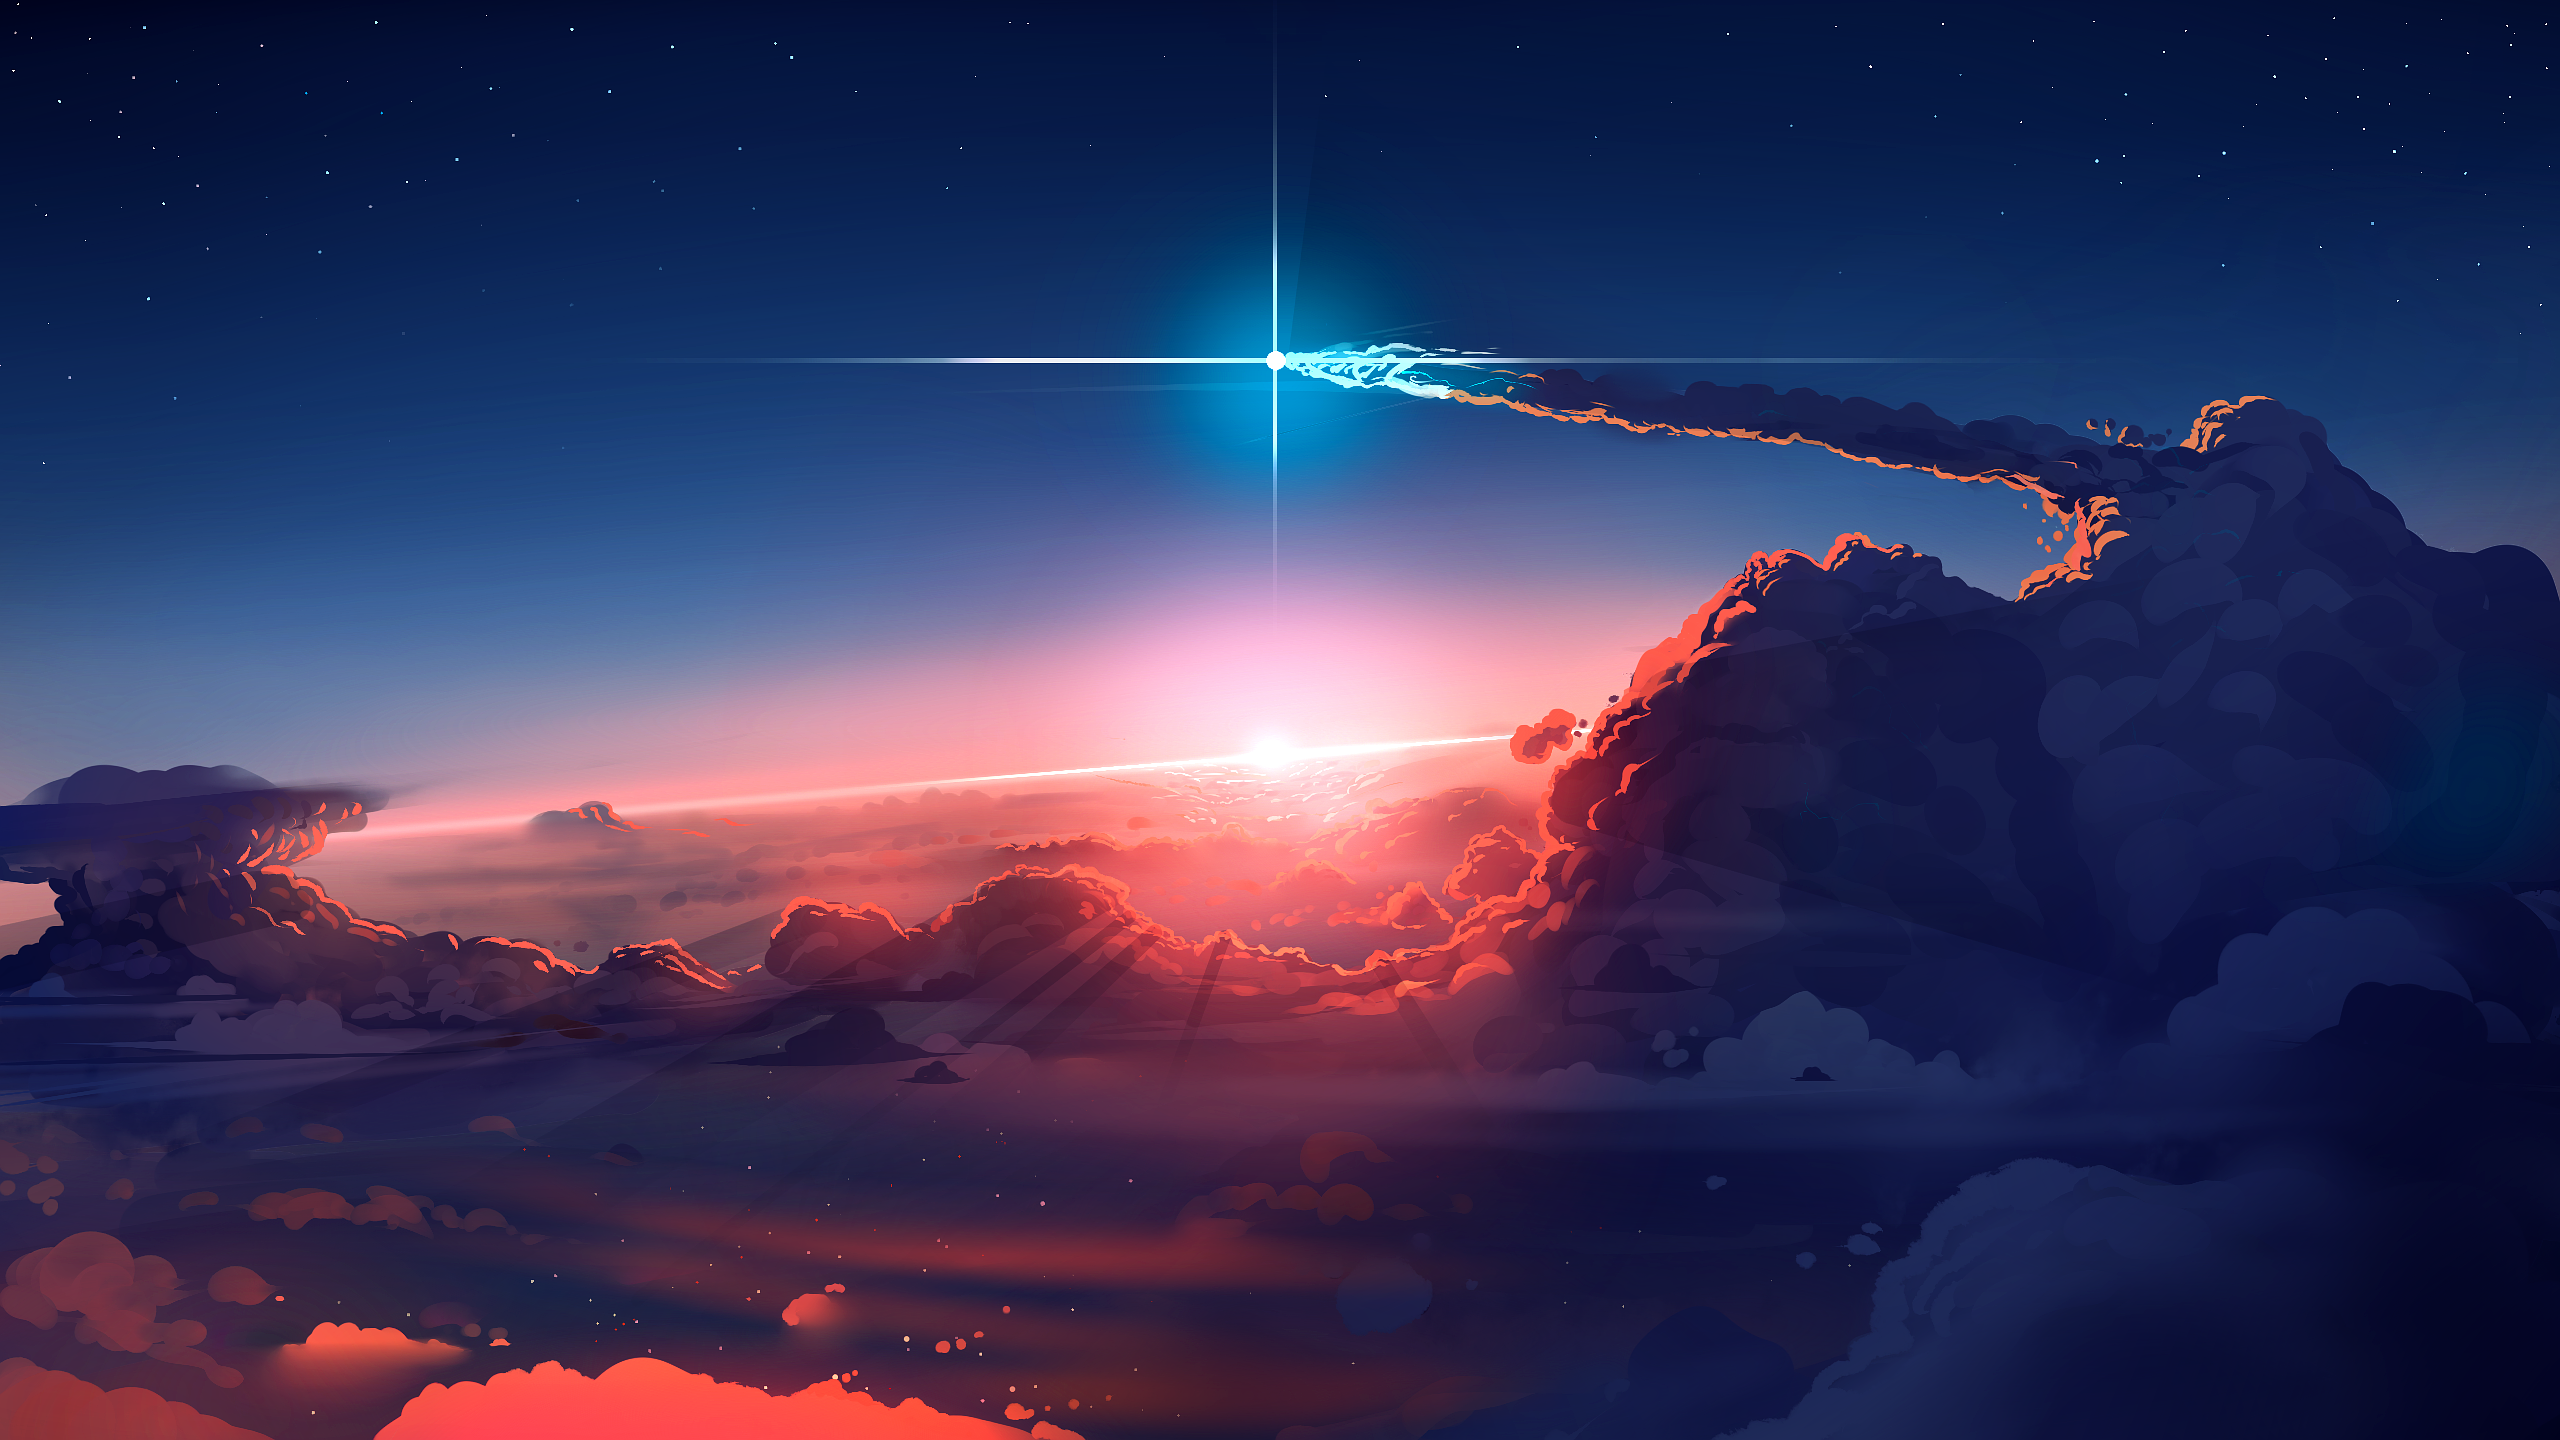 Space 4K wallpapers for your desktop or mobile screen free and easy to